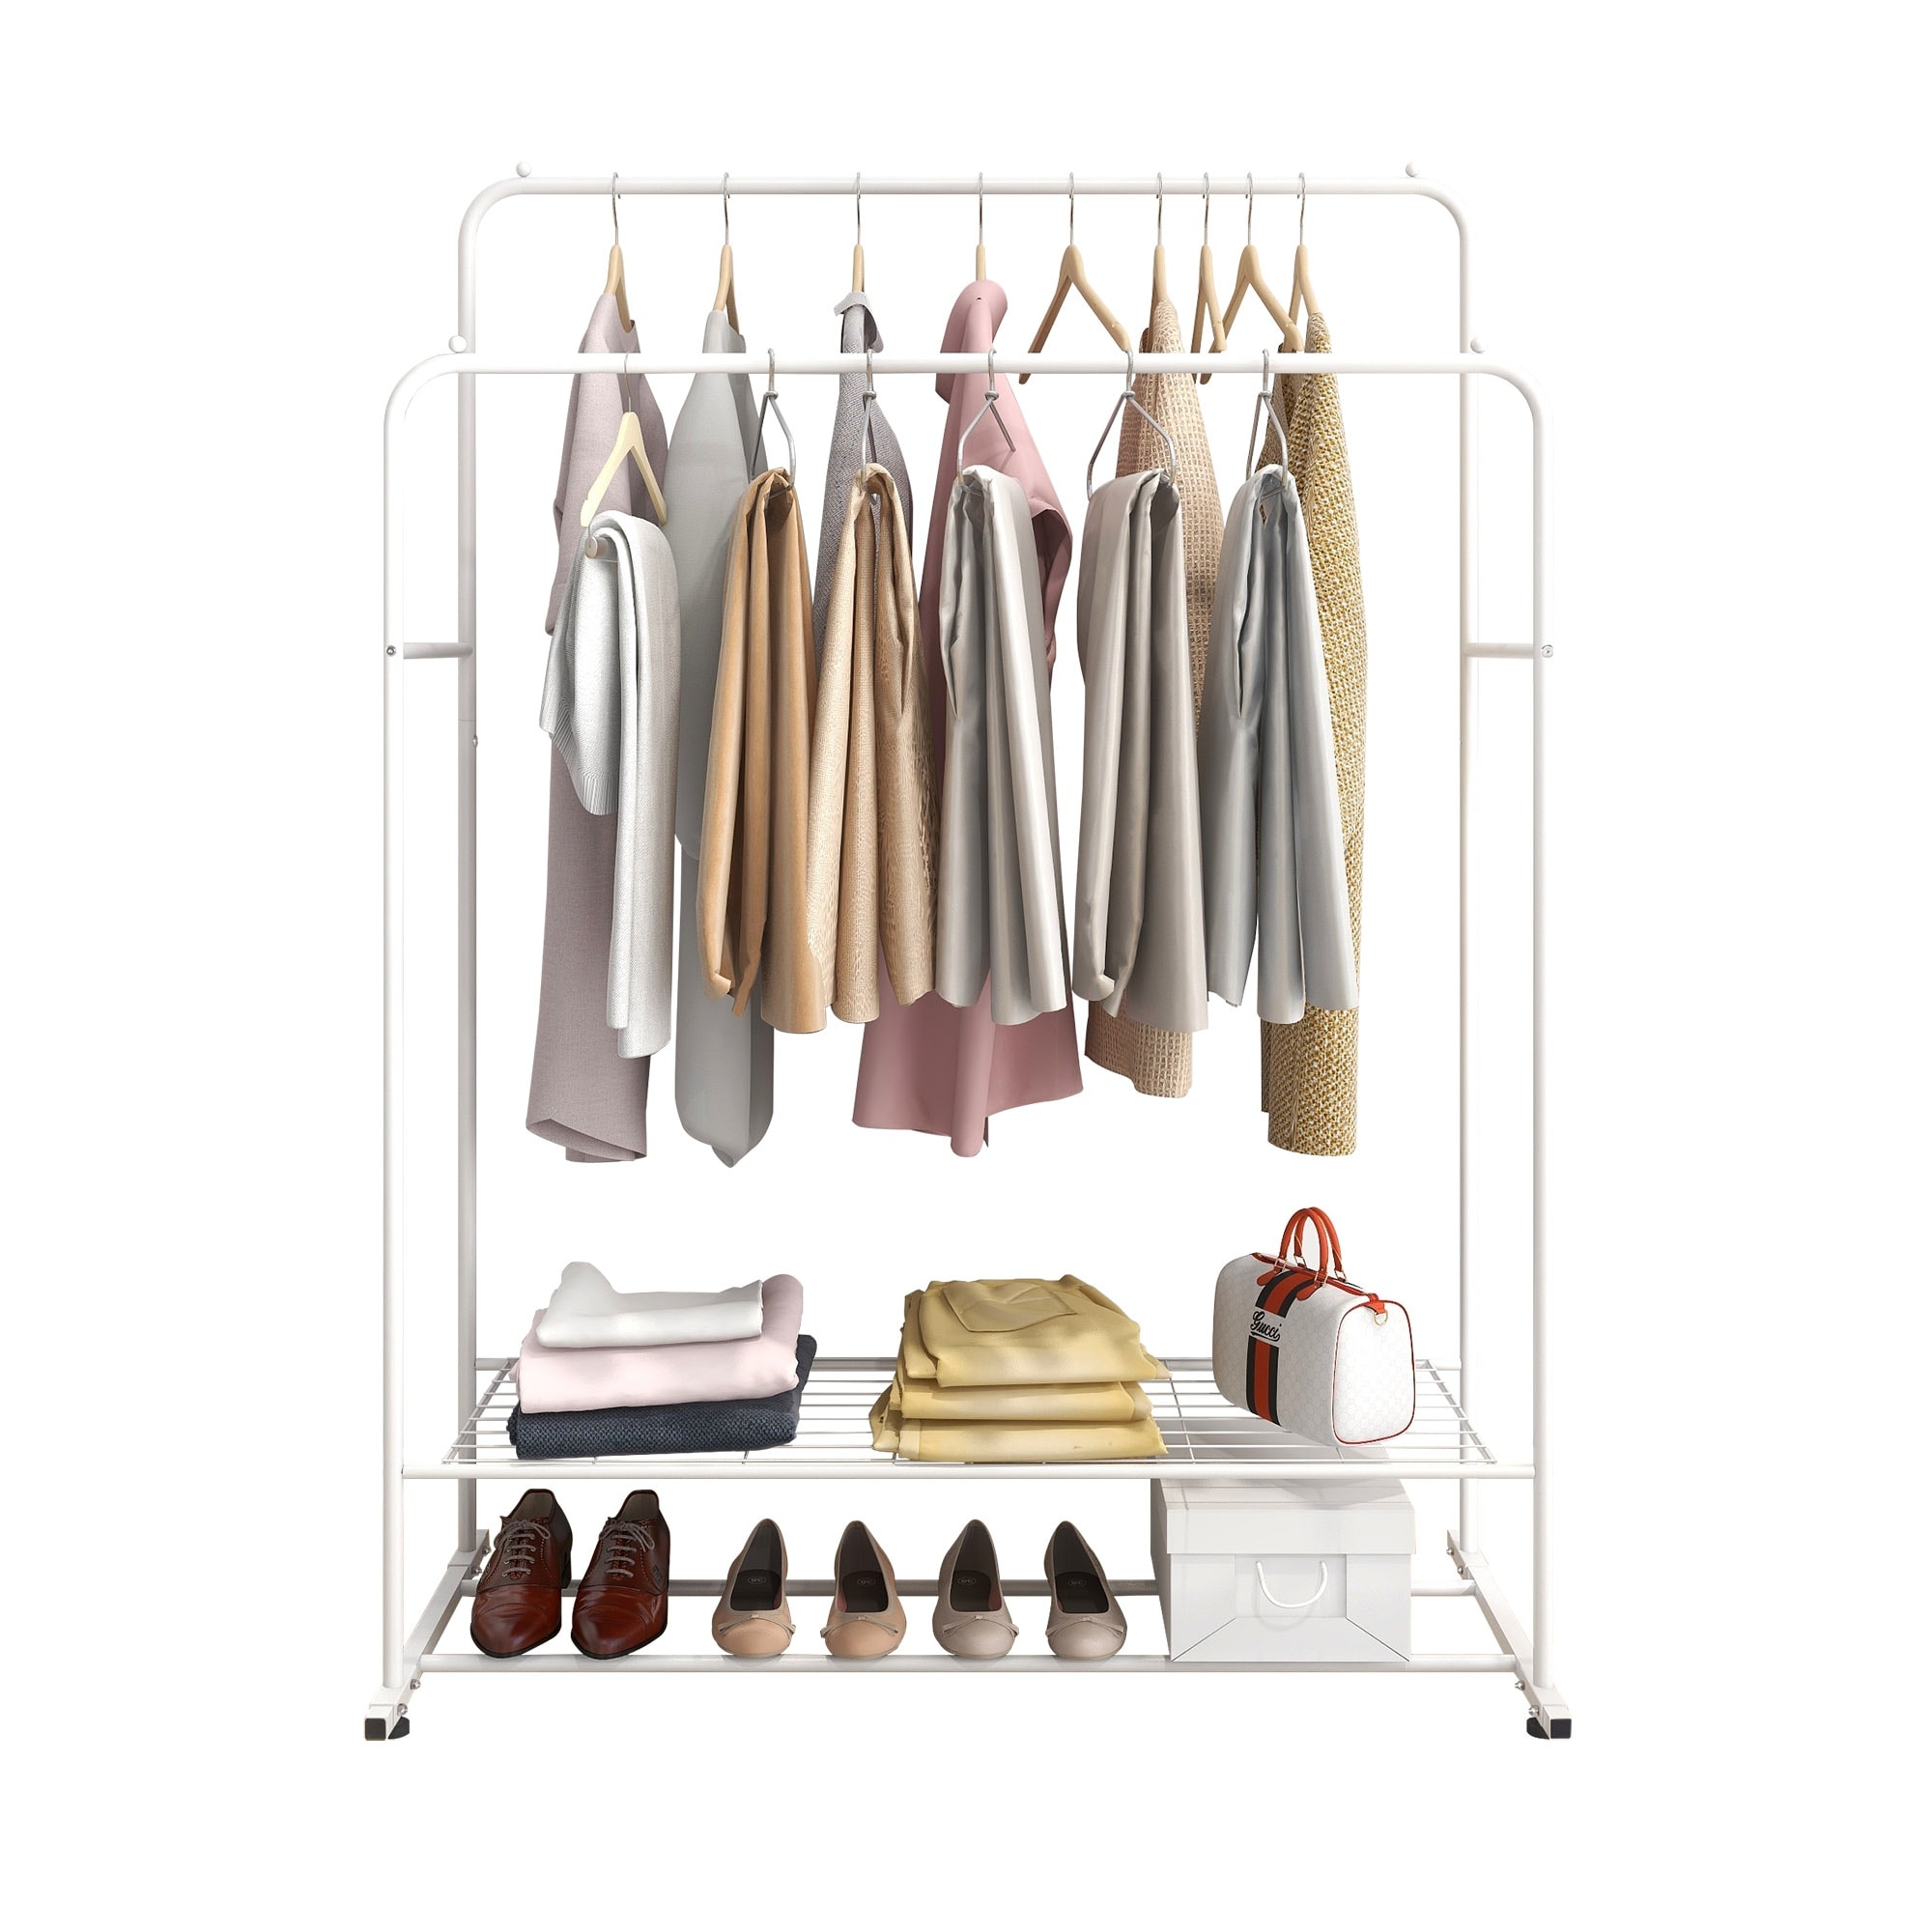 https://ak1.ostkcdn.com/images/products/is/images/direct/c5fd2152e9f5e5625eaa639fd75f7bb337b840c7/Laiensia-Double-Rods-Clothing-Rack-with-Wheels%2C-Garment-Rack-for-Hanging-Clothes%2C-Multi-functional-Bedroom-Clothes-Rack.jpg